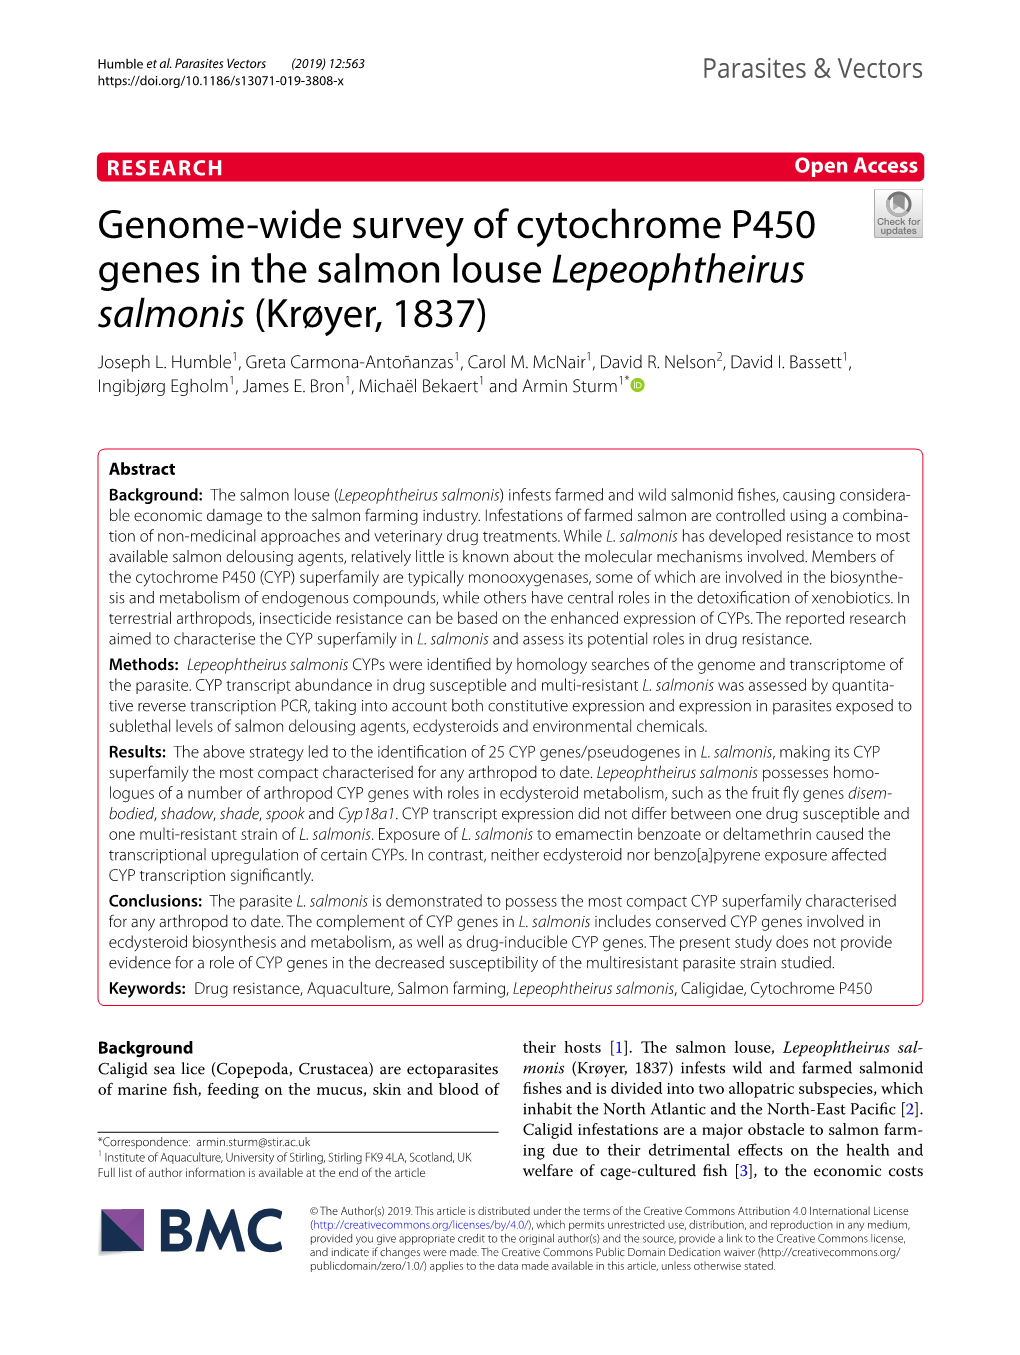 Genome-Wide Survey of Cytochrome P450 Genes in the Salmon Louse